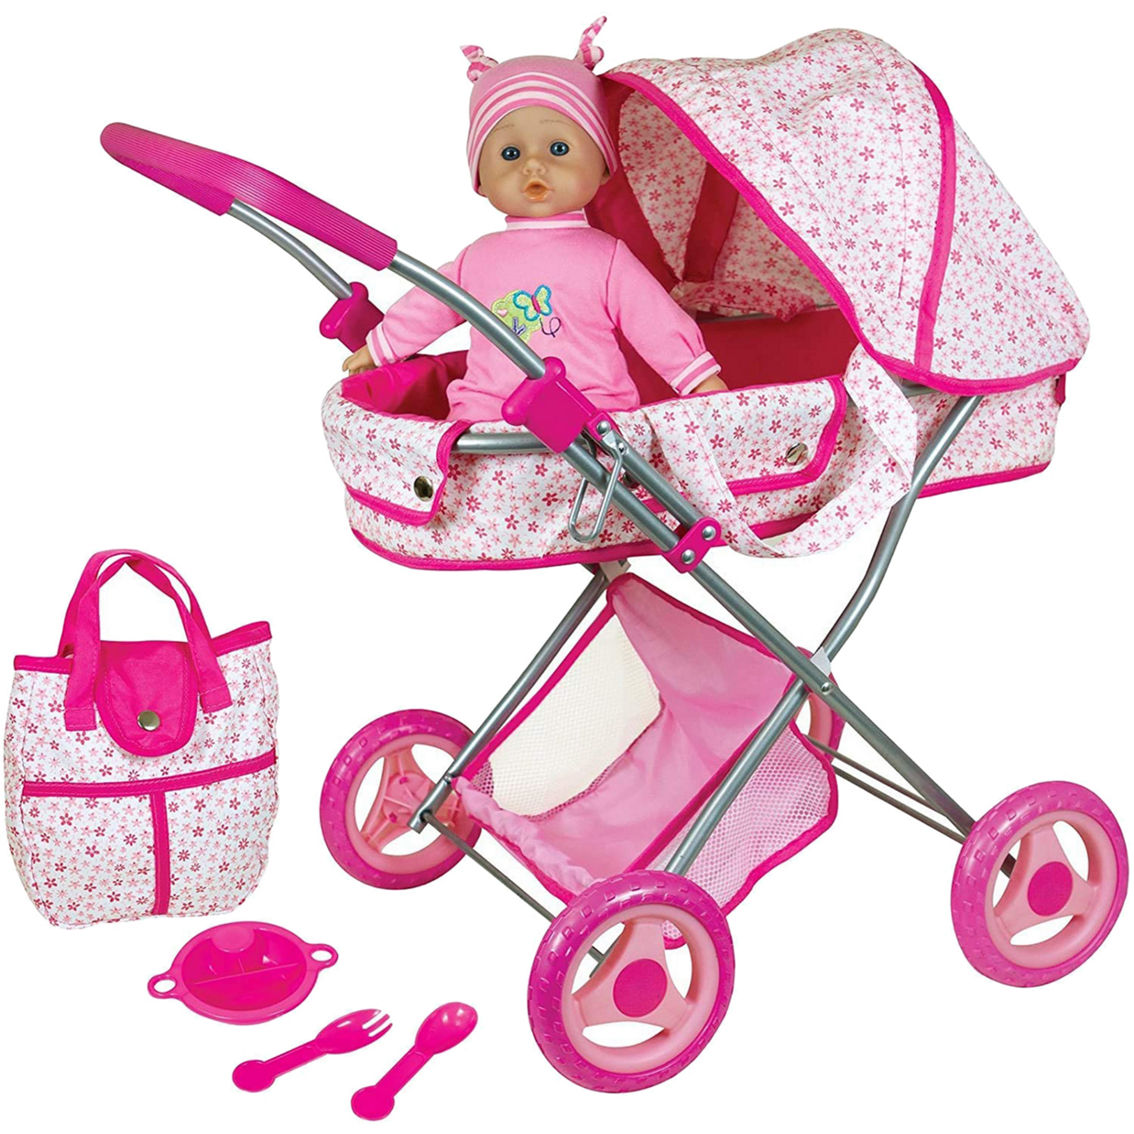 Lissi Deluxe Doll Pram with 13 in. Baby Doll and Accessories - Image 2 of 4